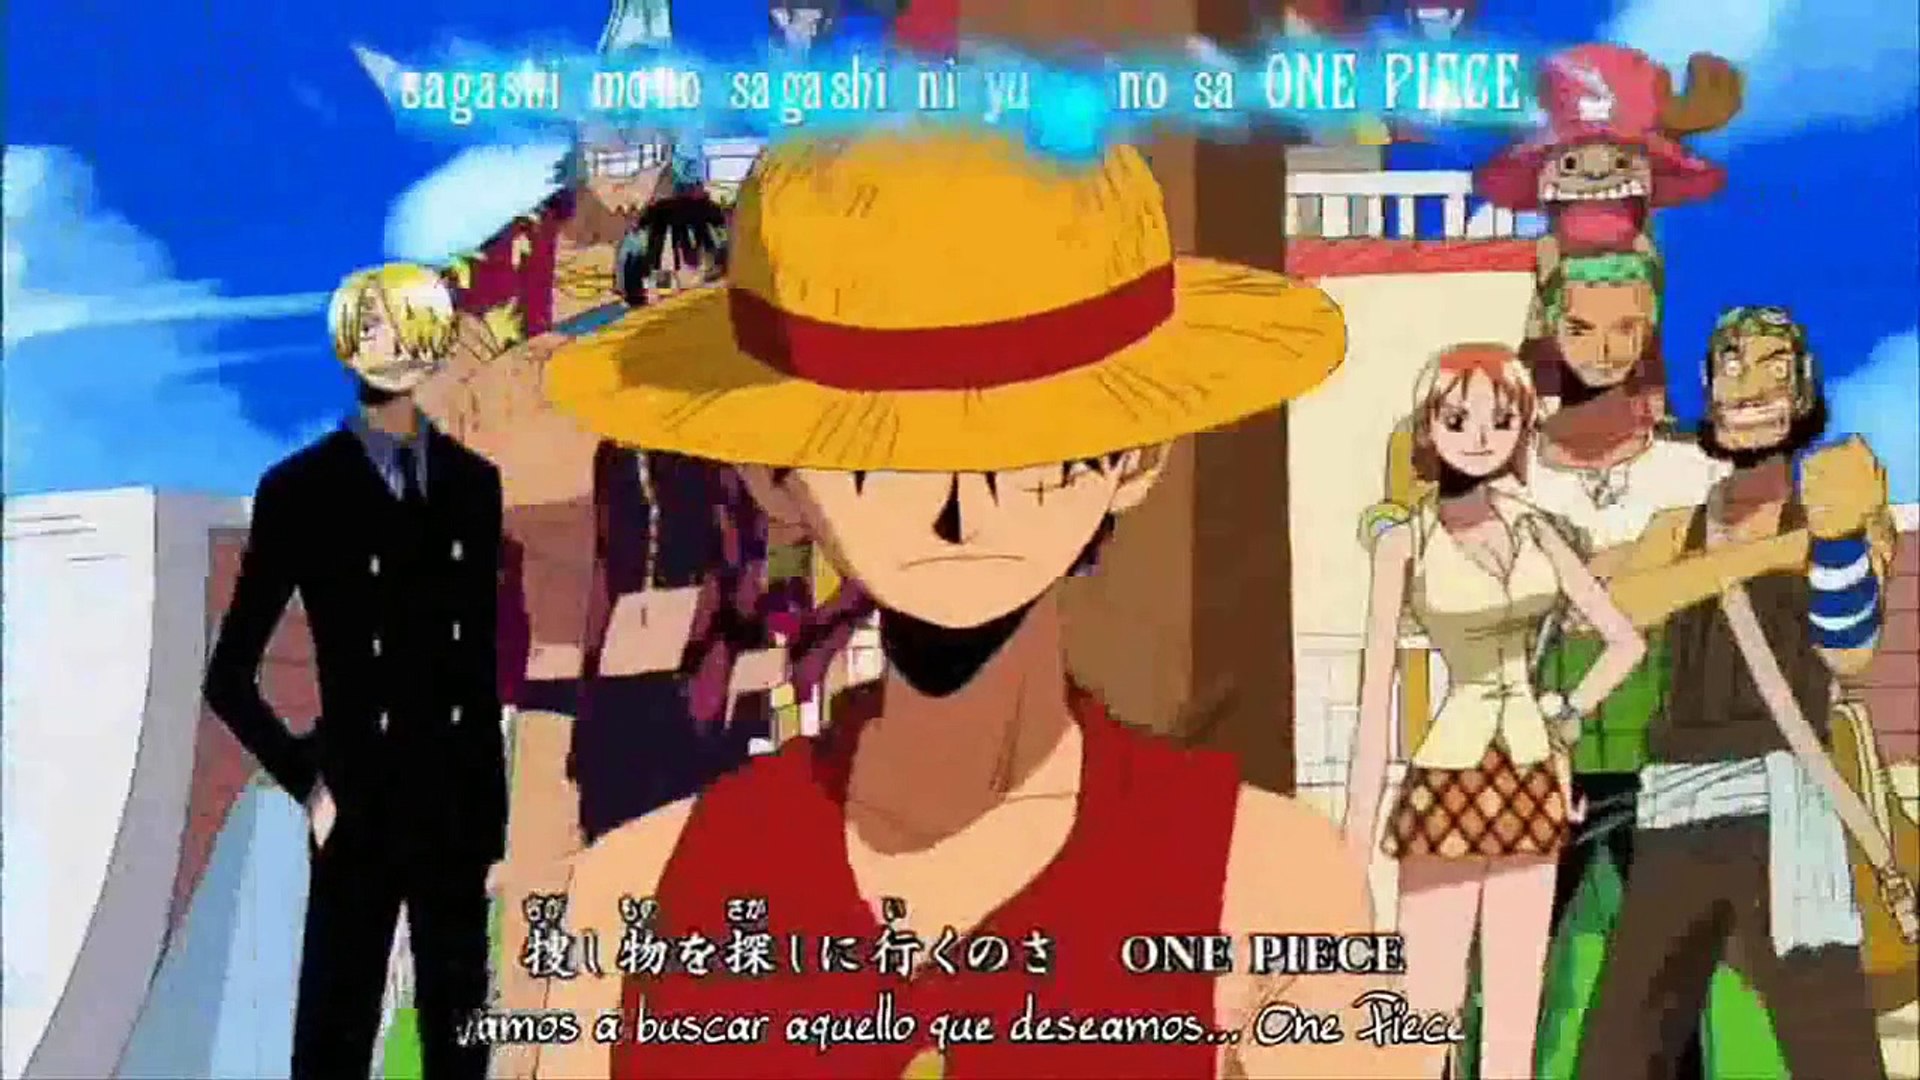 One Piece Op 10 We Are Completo Full Hd Video Dailymotion